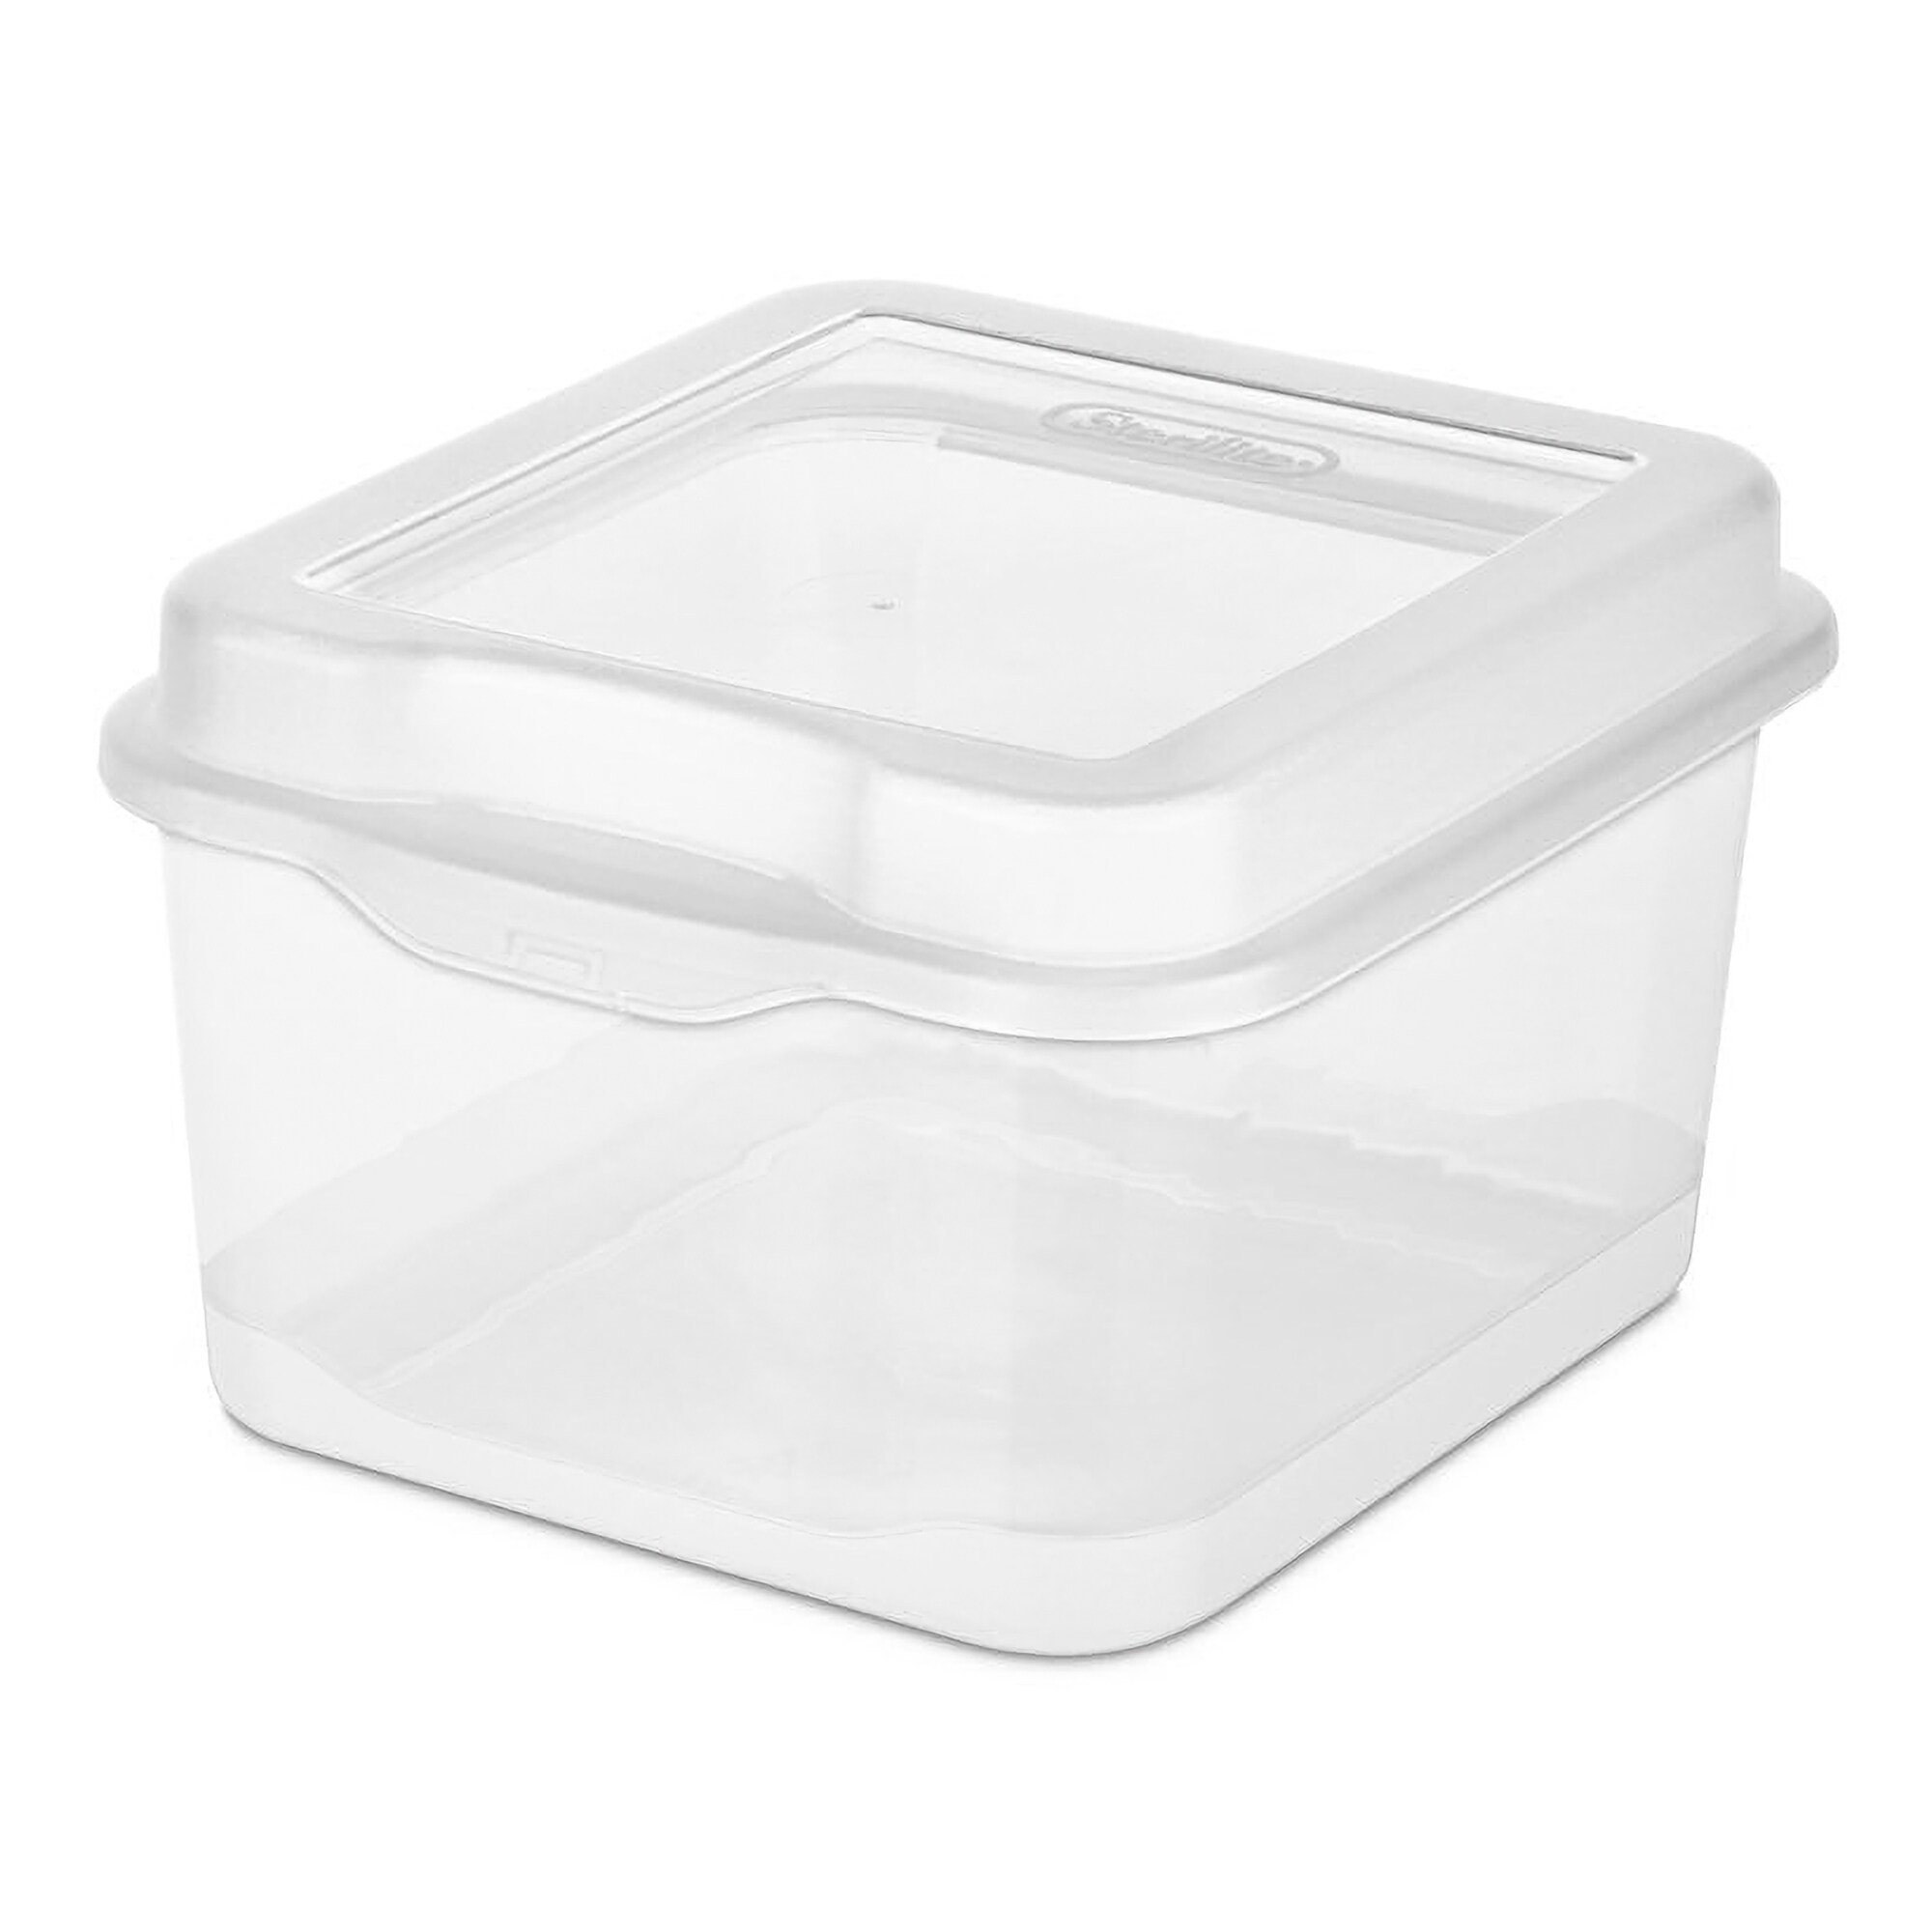 https://ak1.ostkcdn.com/images/products/is/images/direct/07722110fffd3d489c726520f4ffc21e03494808/Sterilite-Clear-Plastic-Flip-Top-Latching-Storage-Box-Container-w--Lid-%2836-Pack%29.jpg